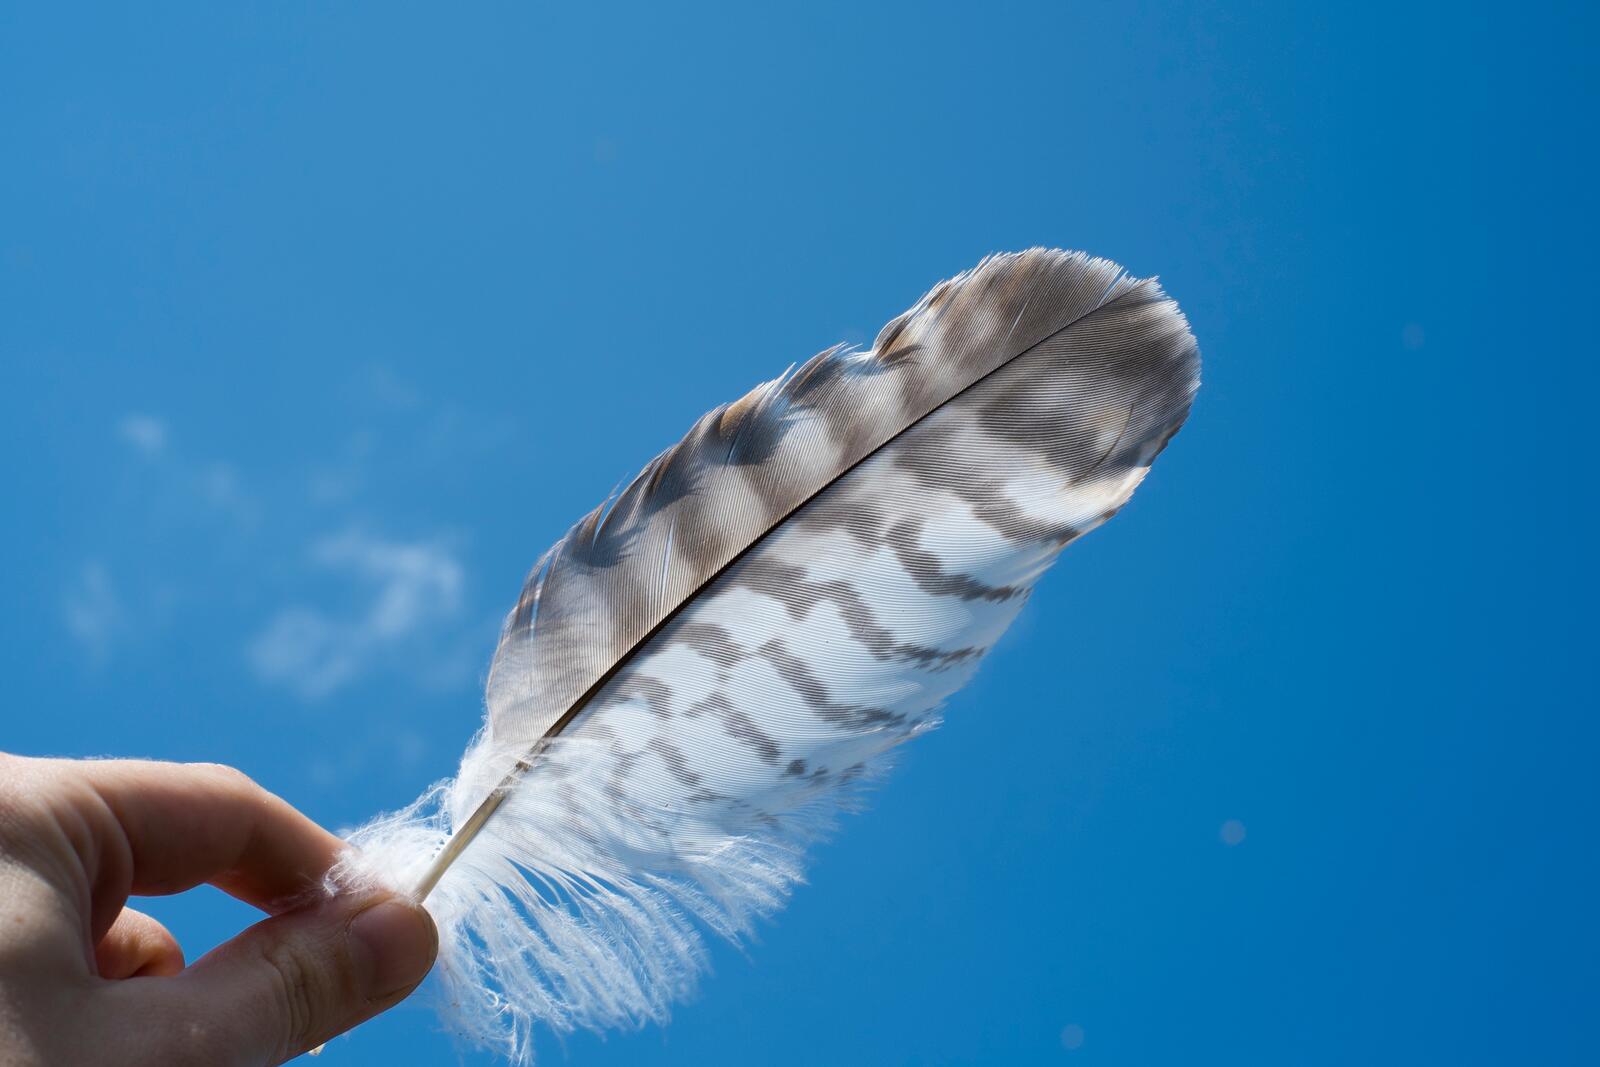 Wallpapers hand feather sky on the desktop